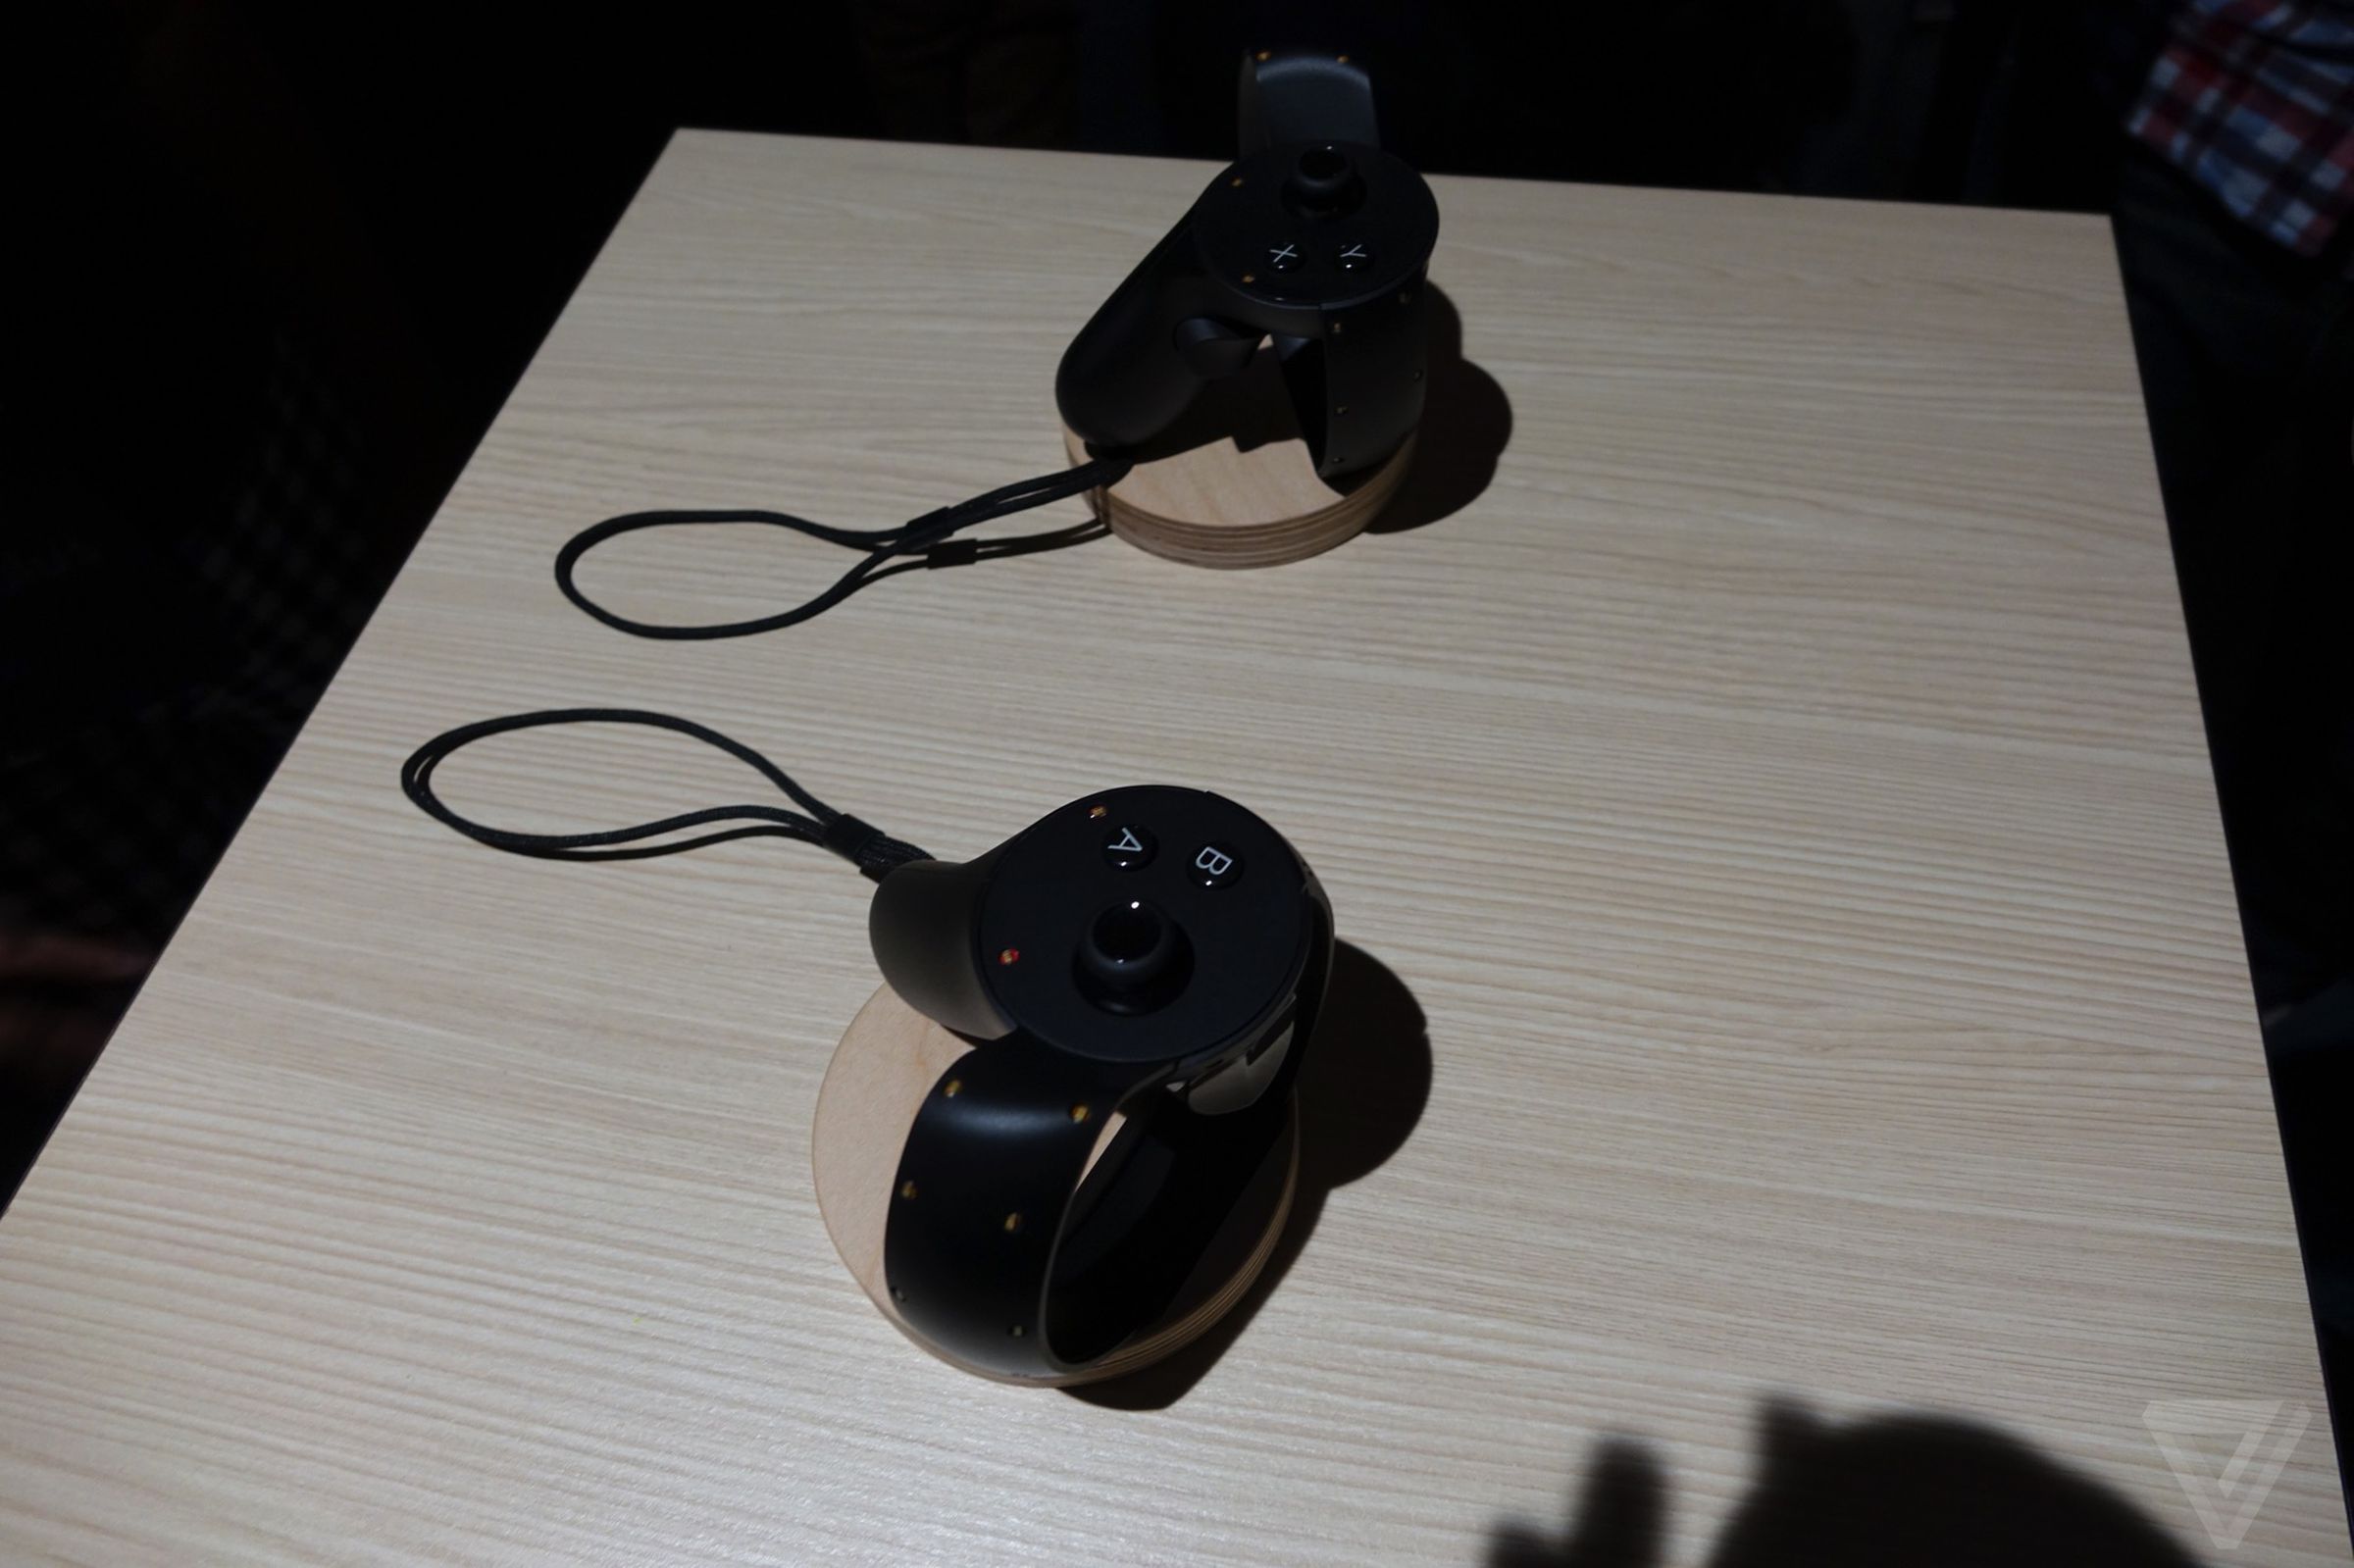 Up close with the Oculus Rift and Oculus Touch